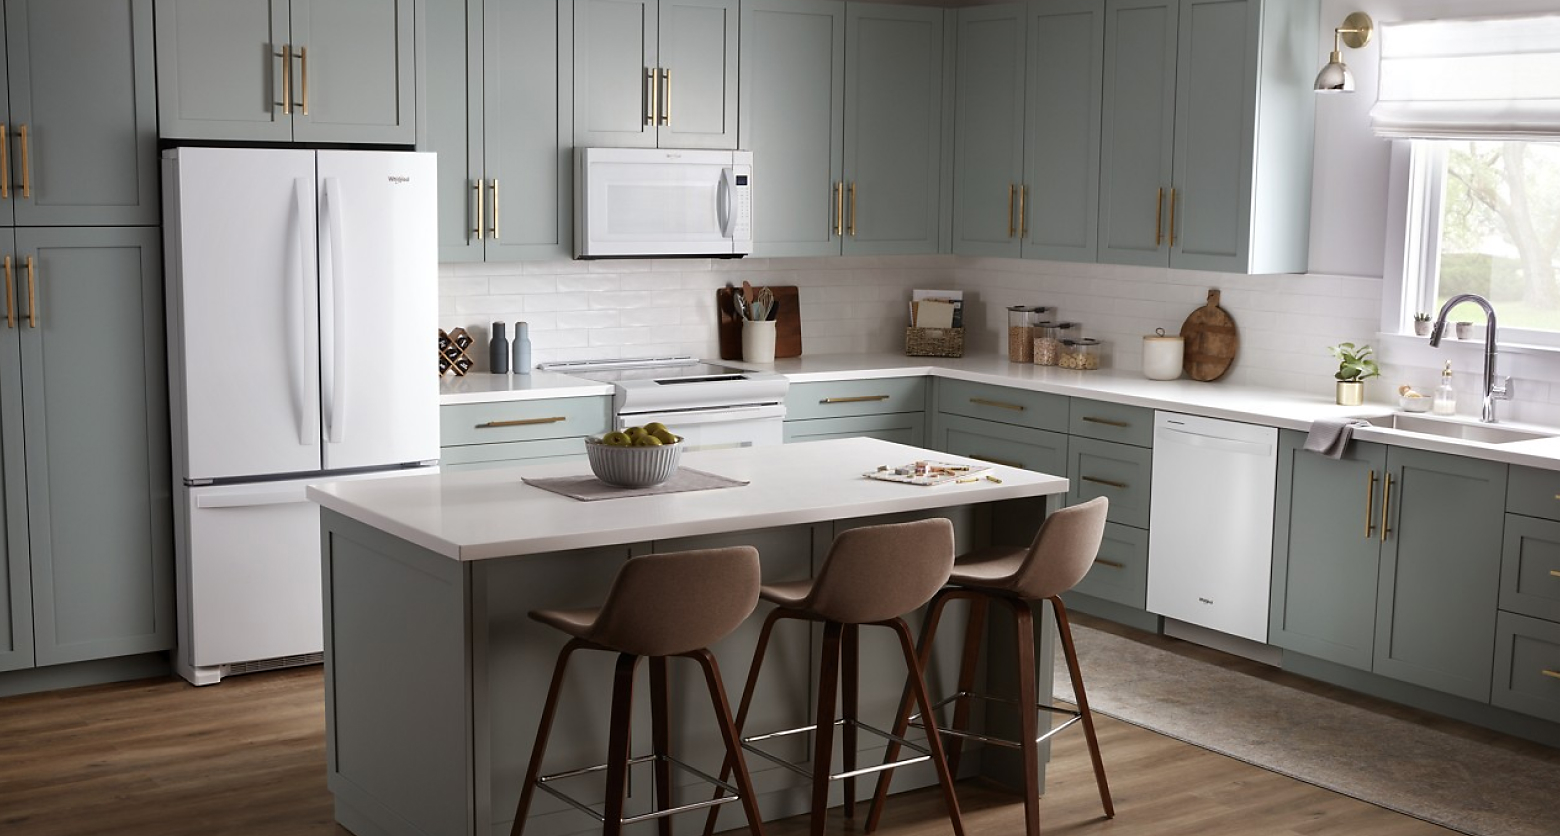 Gray kitchen featuring Whirlpool®  appliances in white